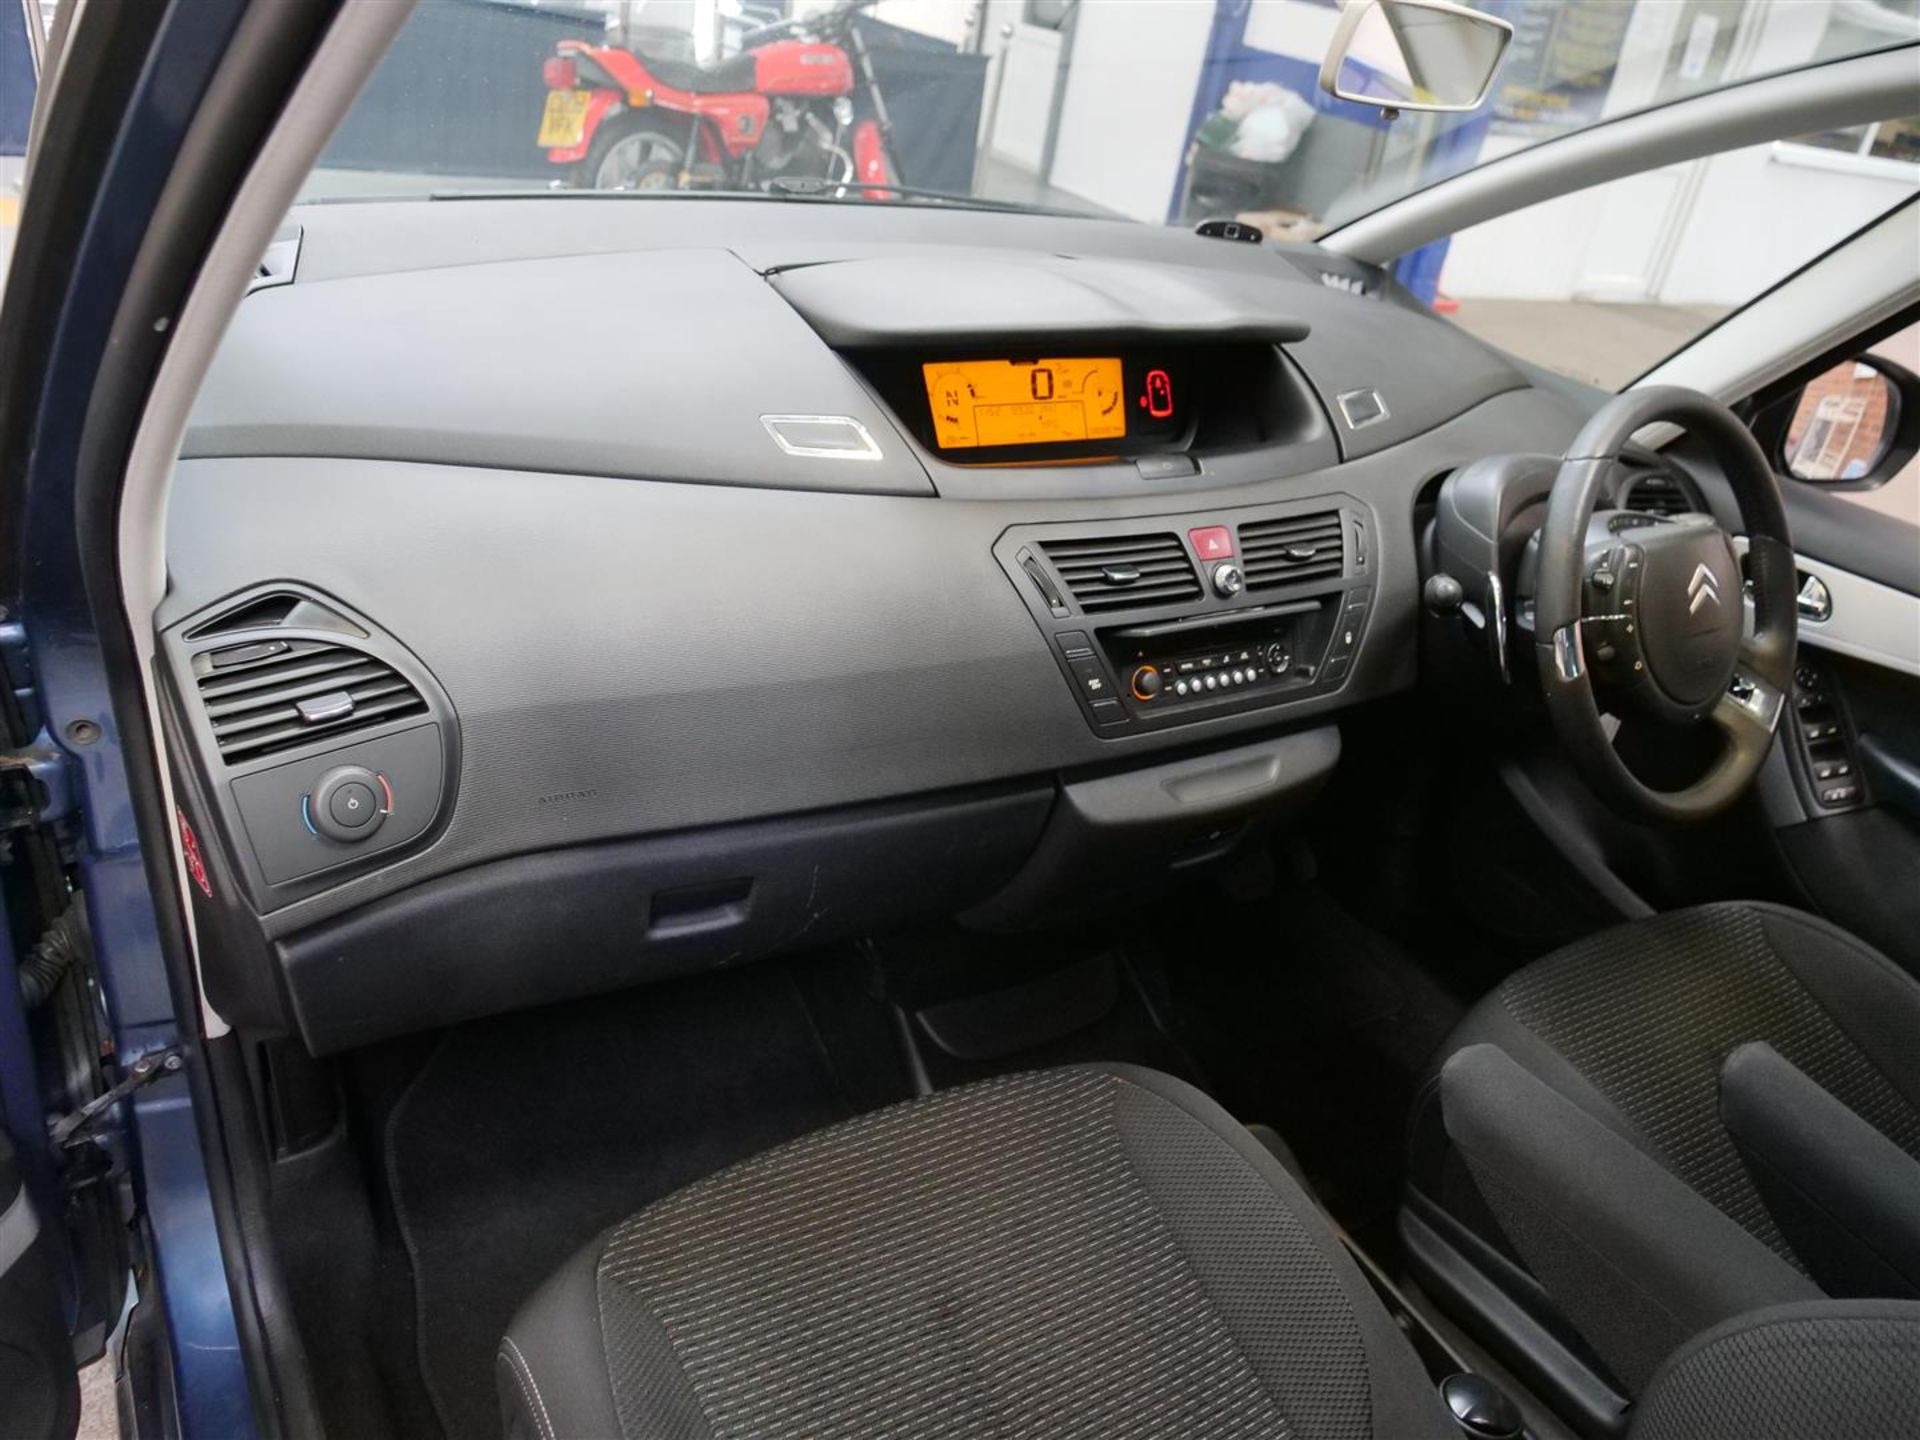 10 10 Citroen C4 Picasso VTR+ HDI - Image 27 of 41